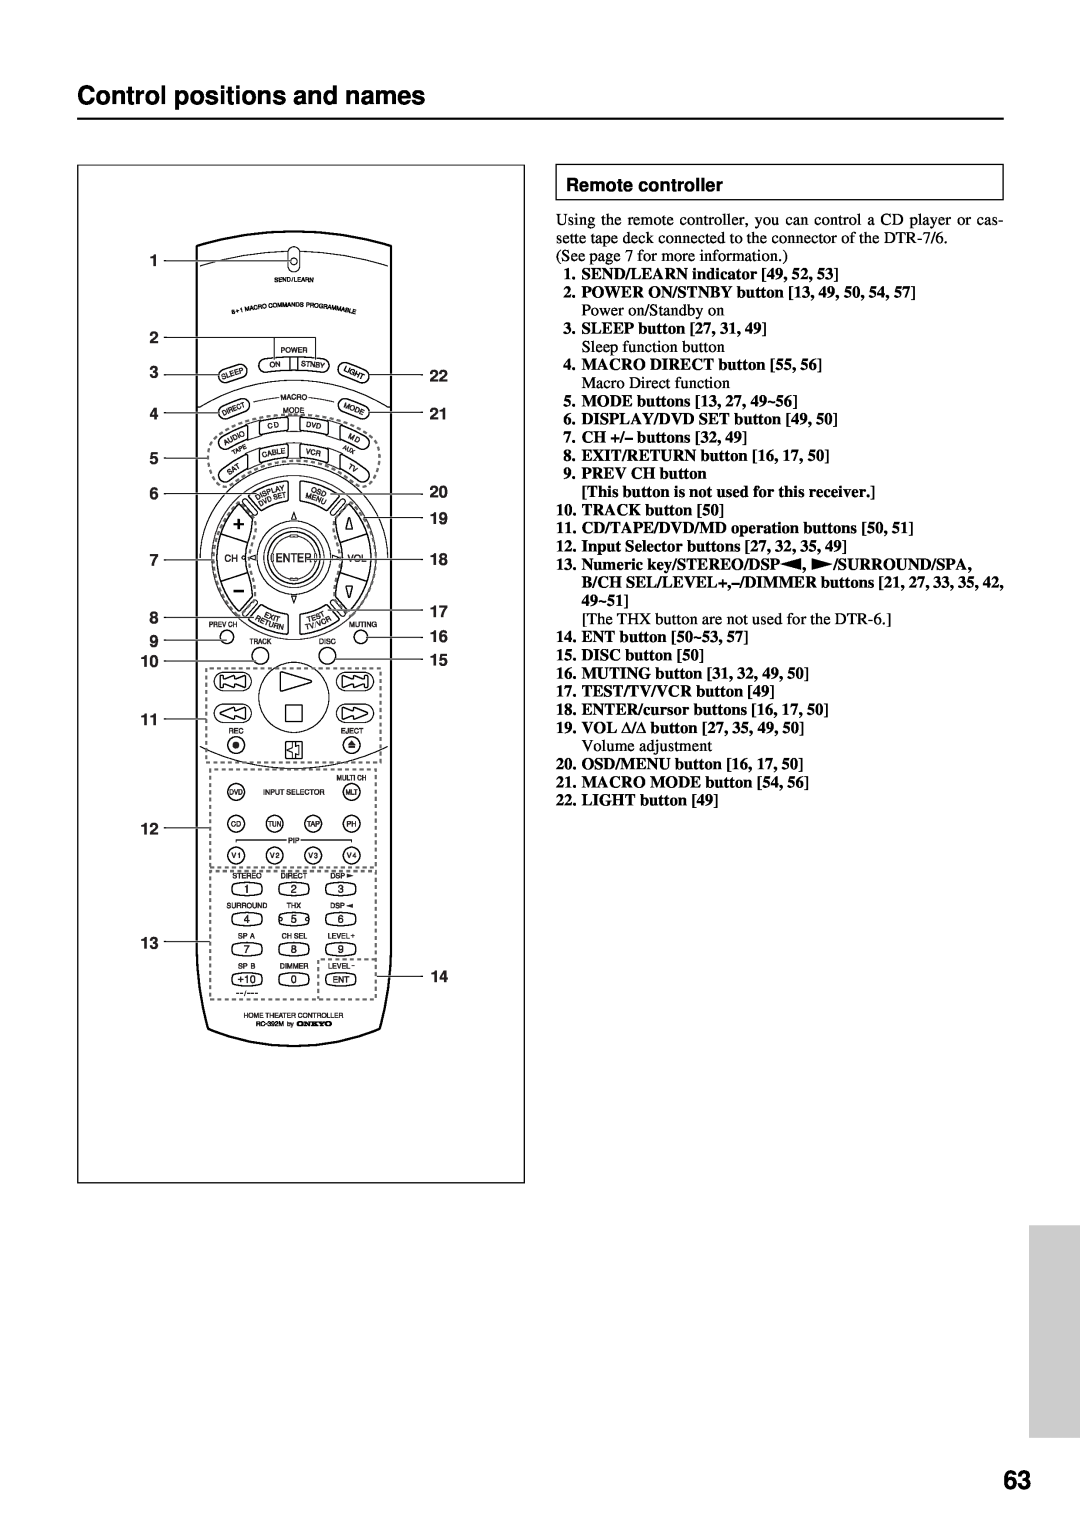 Integra DTR-7 instruction manual Control positions and names, Remote controller, 1 2 3 4 5 6 7 8 9, 22 21 20 19 18 